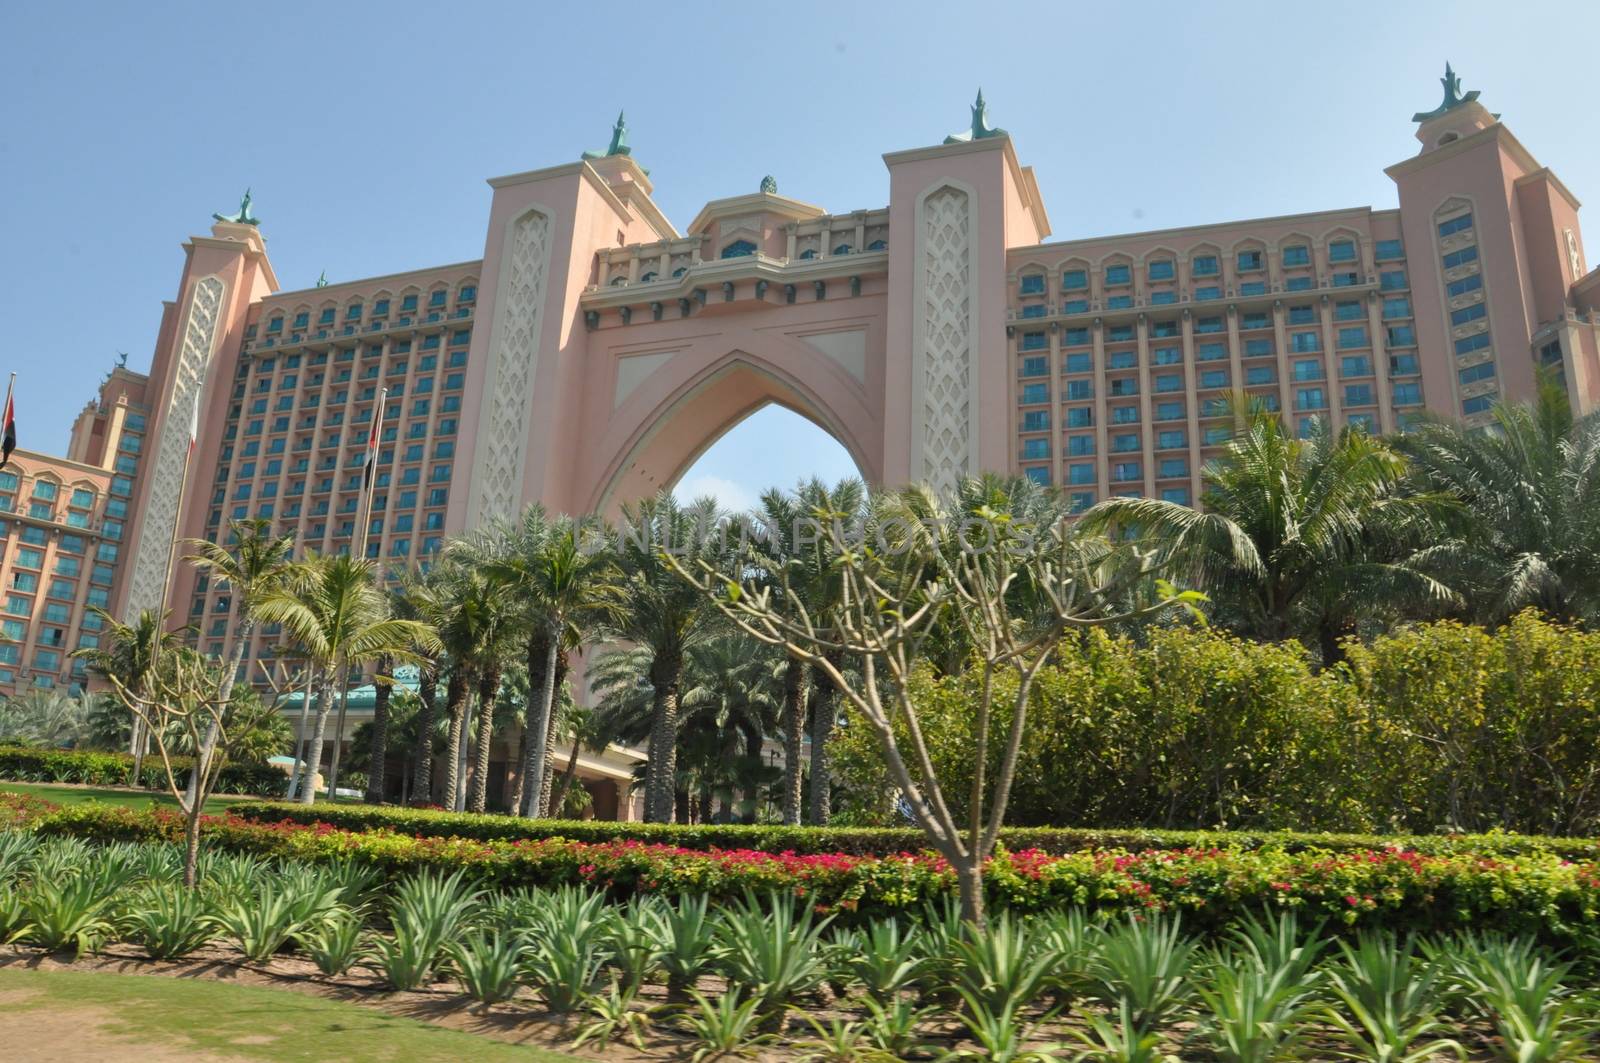 Atlantis The Palm in Dubai, UAE. It is located on Dubais reclaimed artificial island The Palm and was the first resort to be built on the island.